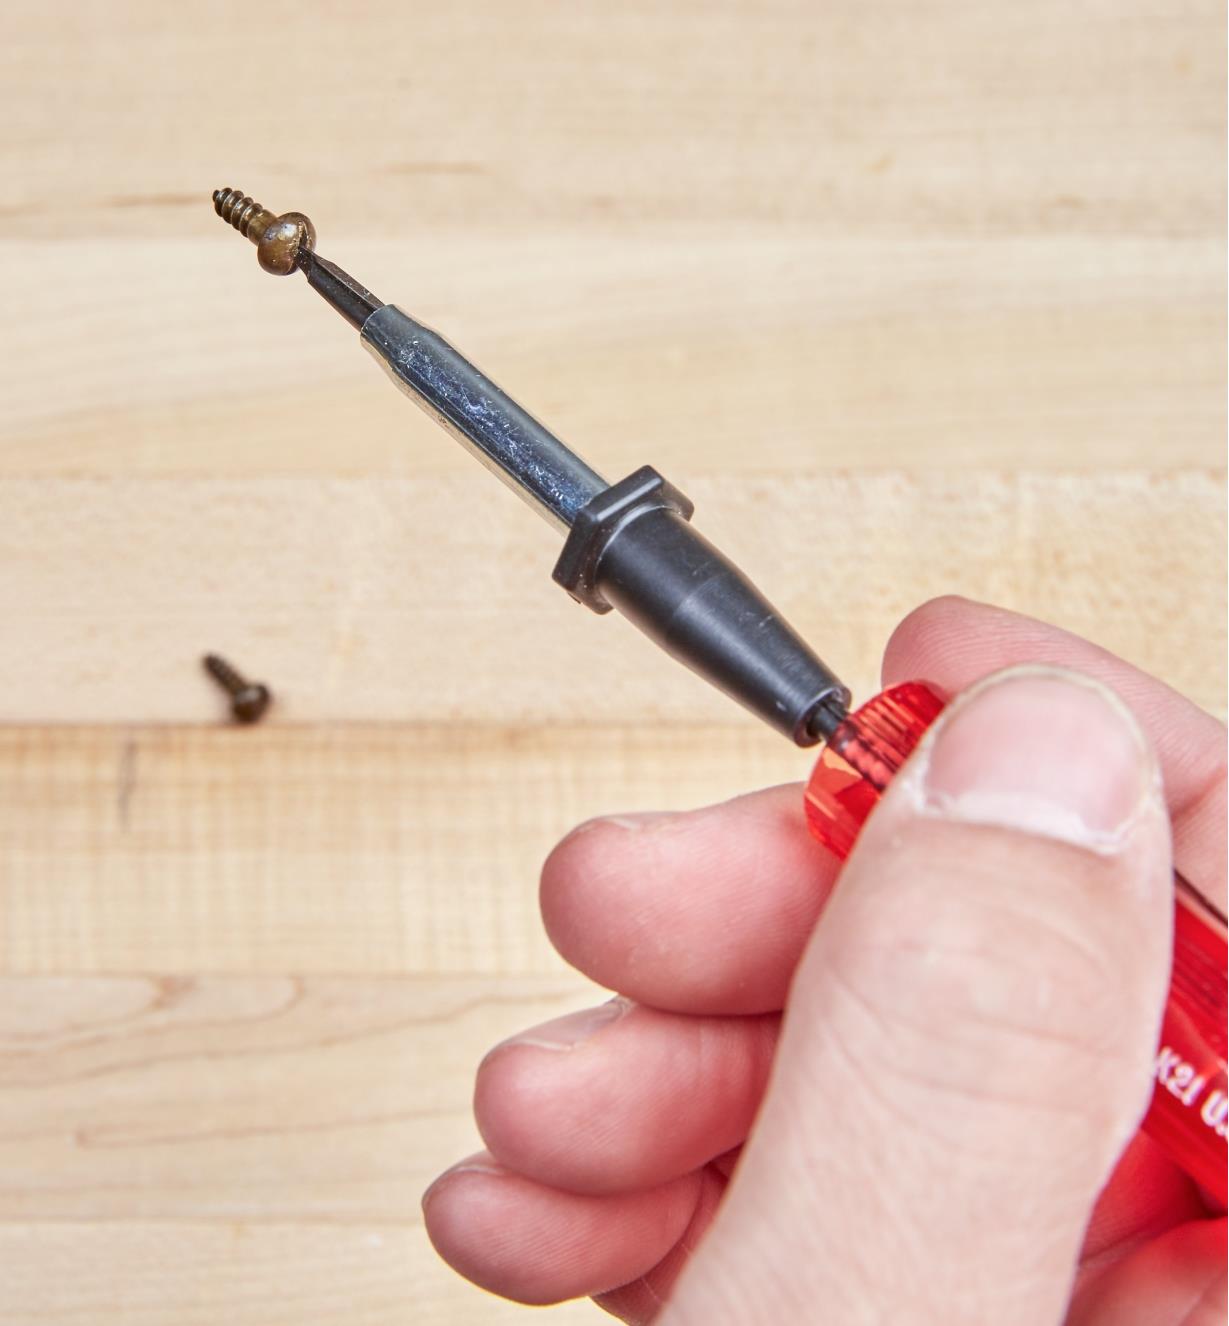 A brass screw held on the tip of the slotted screw-holding screwdriver